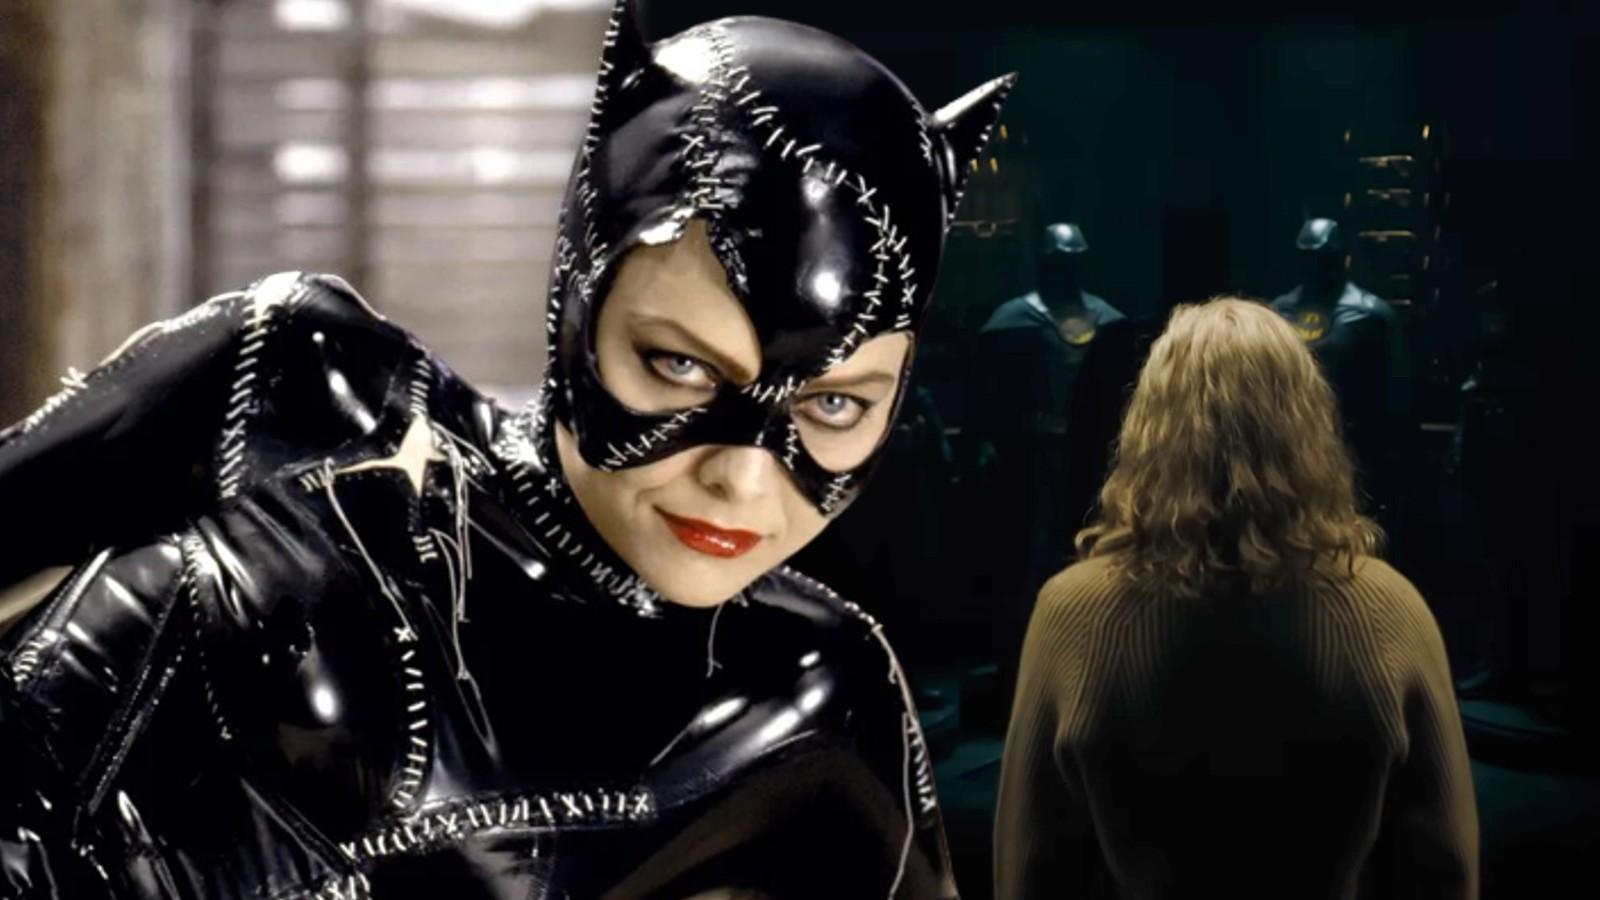 Michelle Pfeiffer in Batman Returns as Catwoman and a still from The Flash trailer